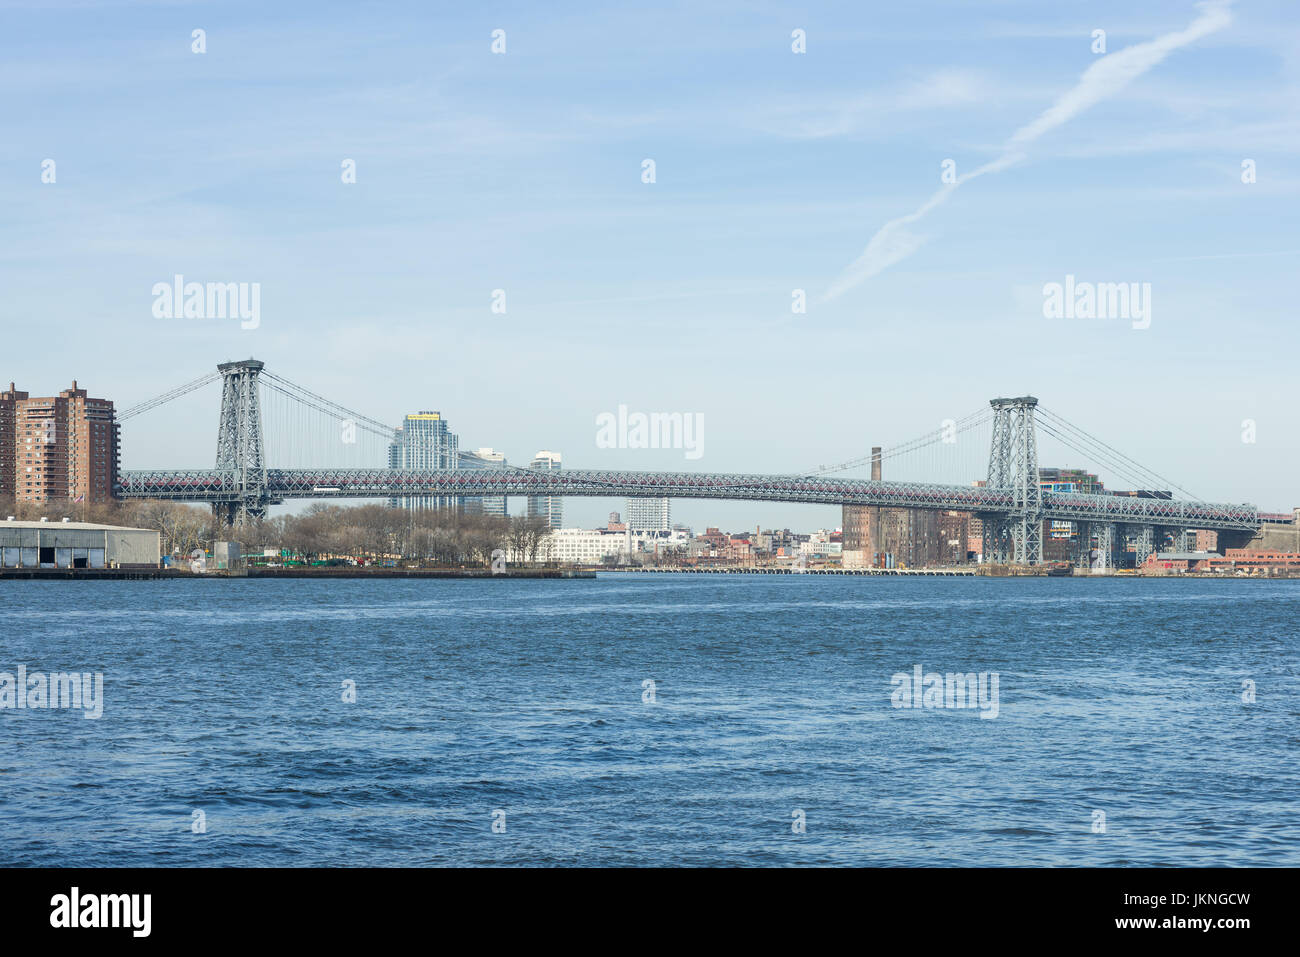 Williamsburg Bridge Which Connects Manhattan With Brooklyn Over The East River, New York Stock Photo